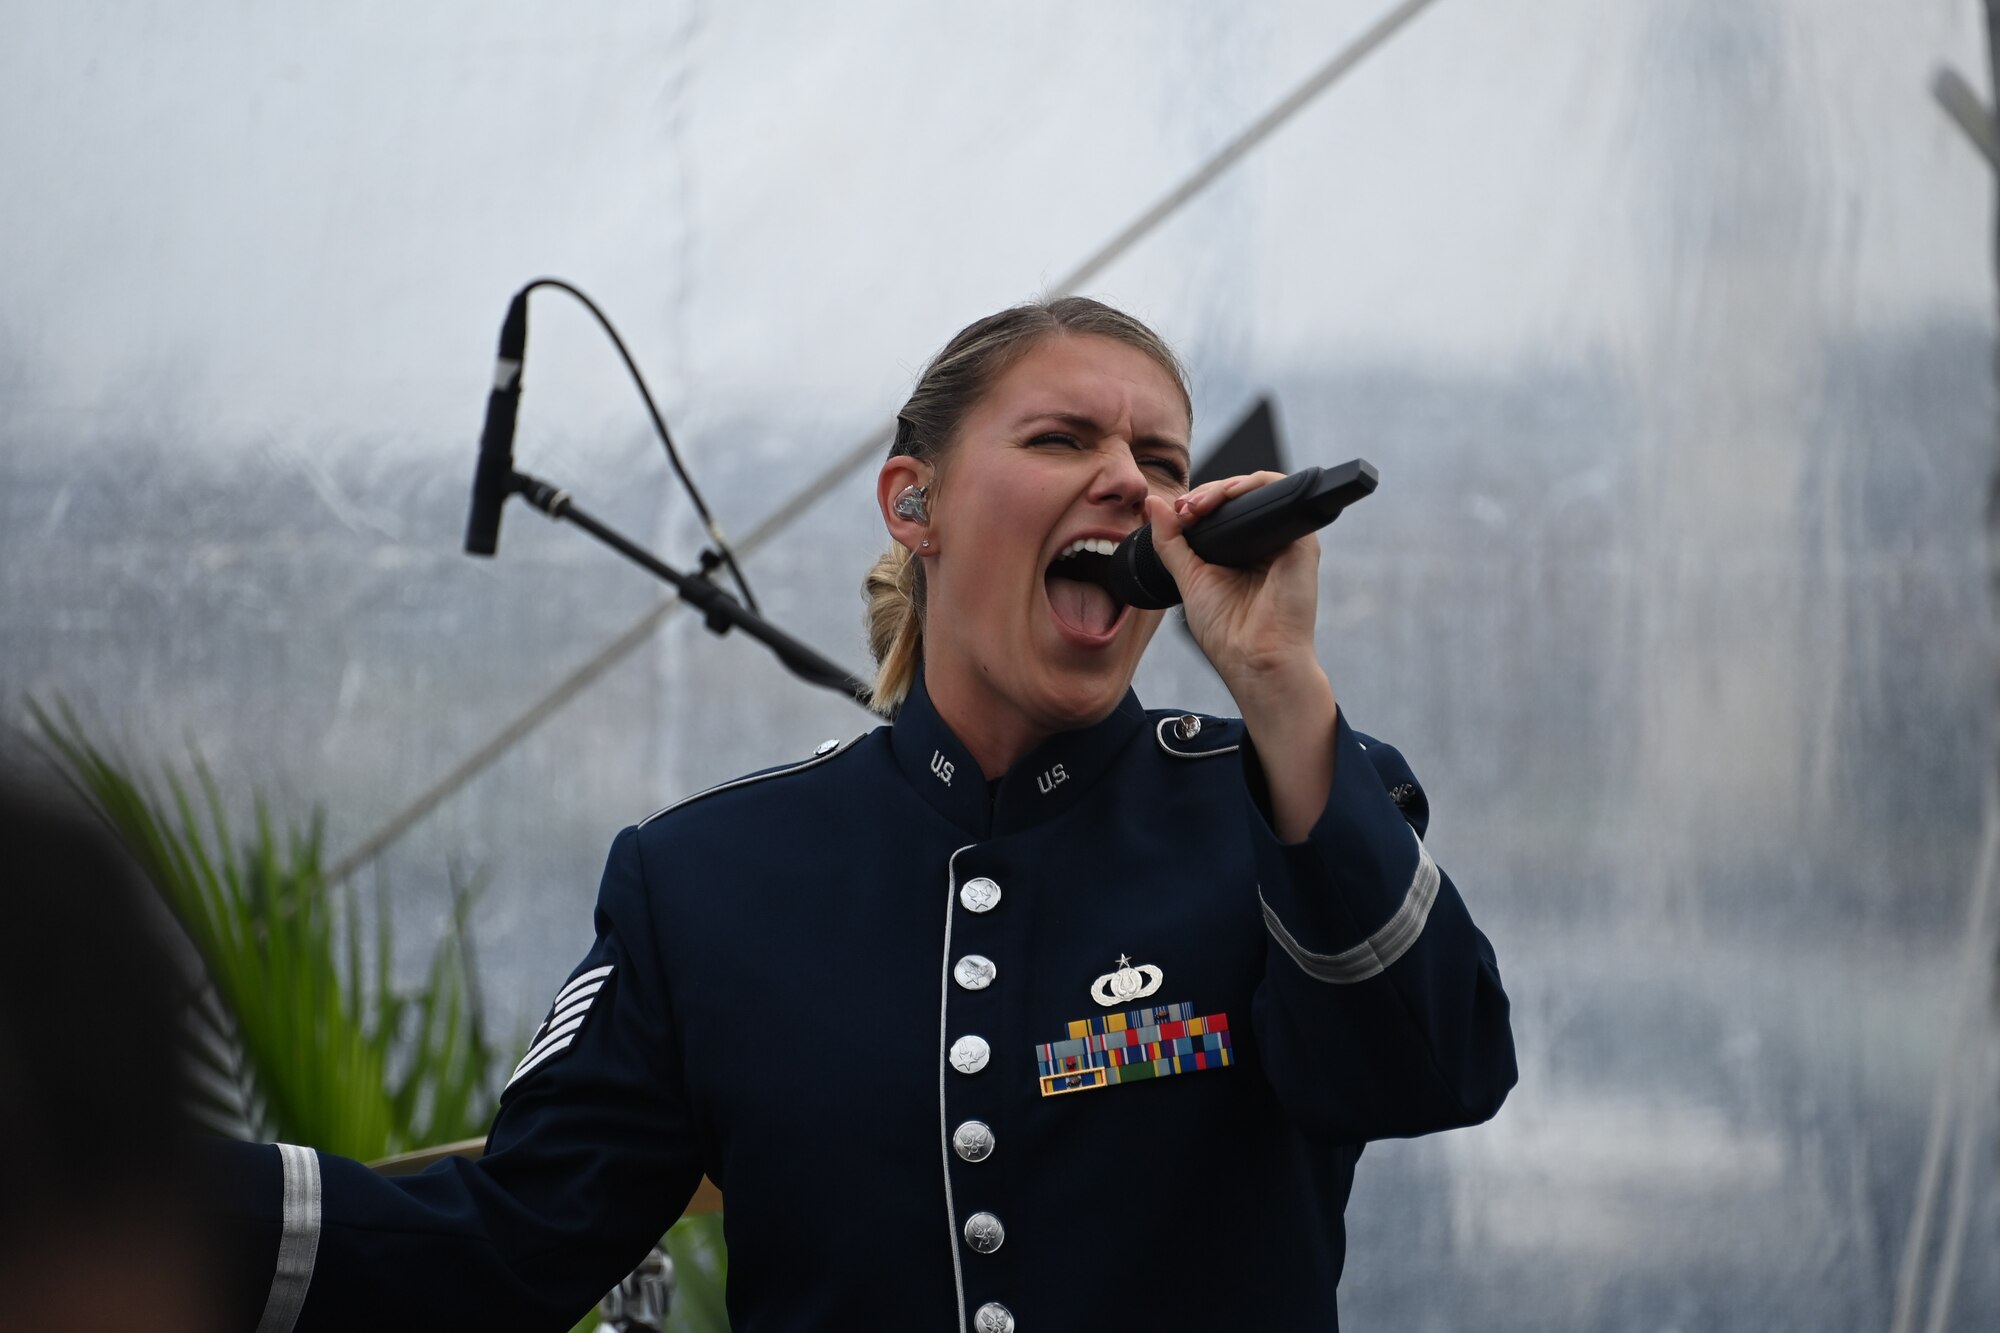 Tech. Sgt. Nadia Sosnoski, U.S. Air Force Band Singing Sergeants soprano, sings at the opening of Spirit Park in National Harbor, Md., Nov. 11, 2022. After the raising of the flag, the event continued with the playing of the Air Force Band’s original song “This Flag” where the crowd shared a moment of musical harmony. (U.S. Air Force photo by Staff Sgt. Spencer Slocum)